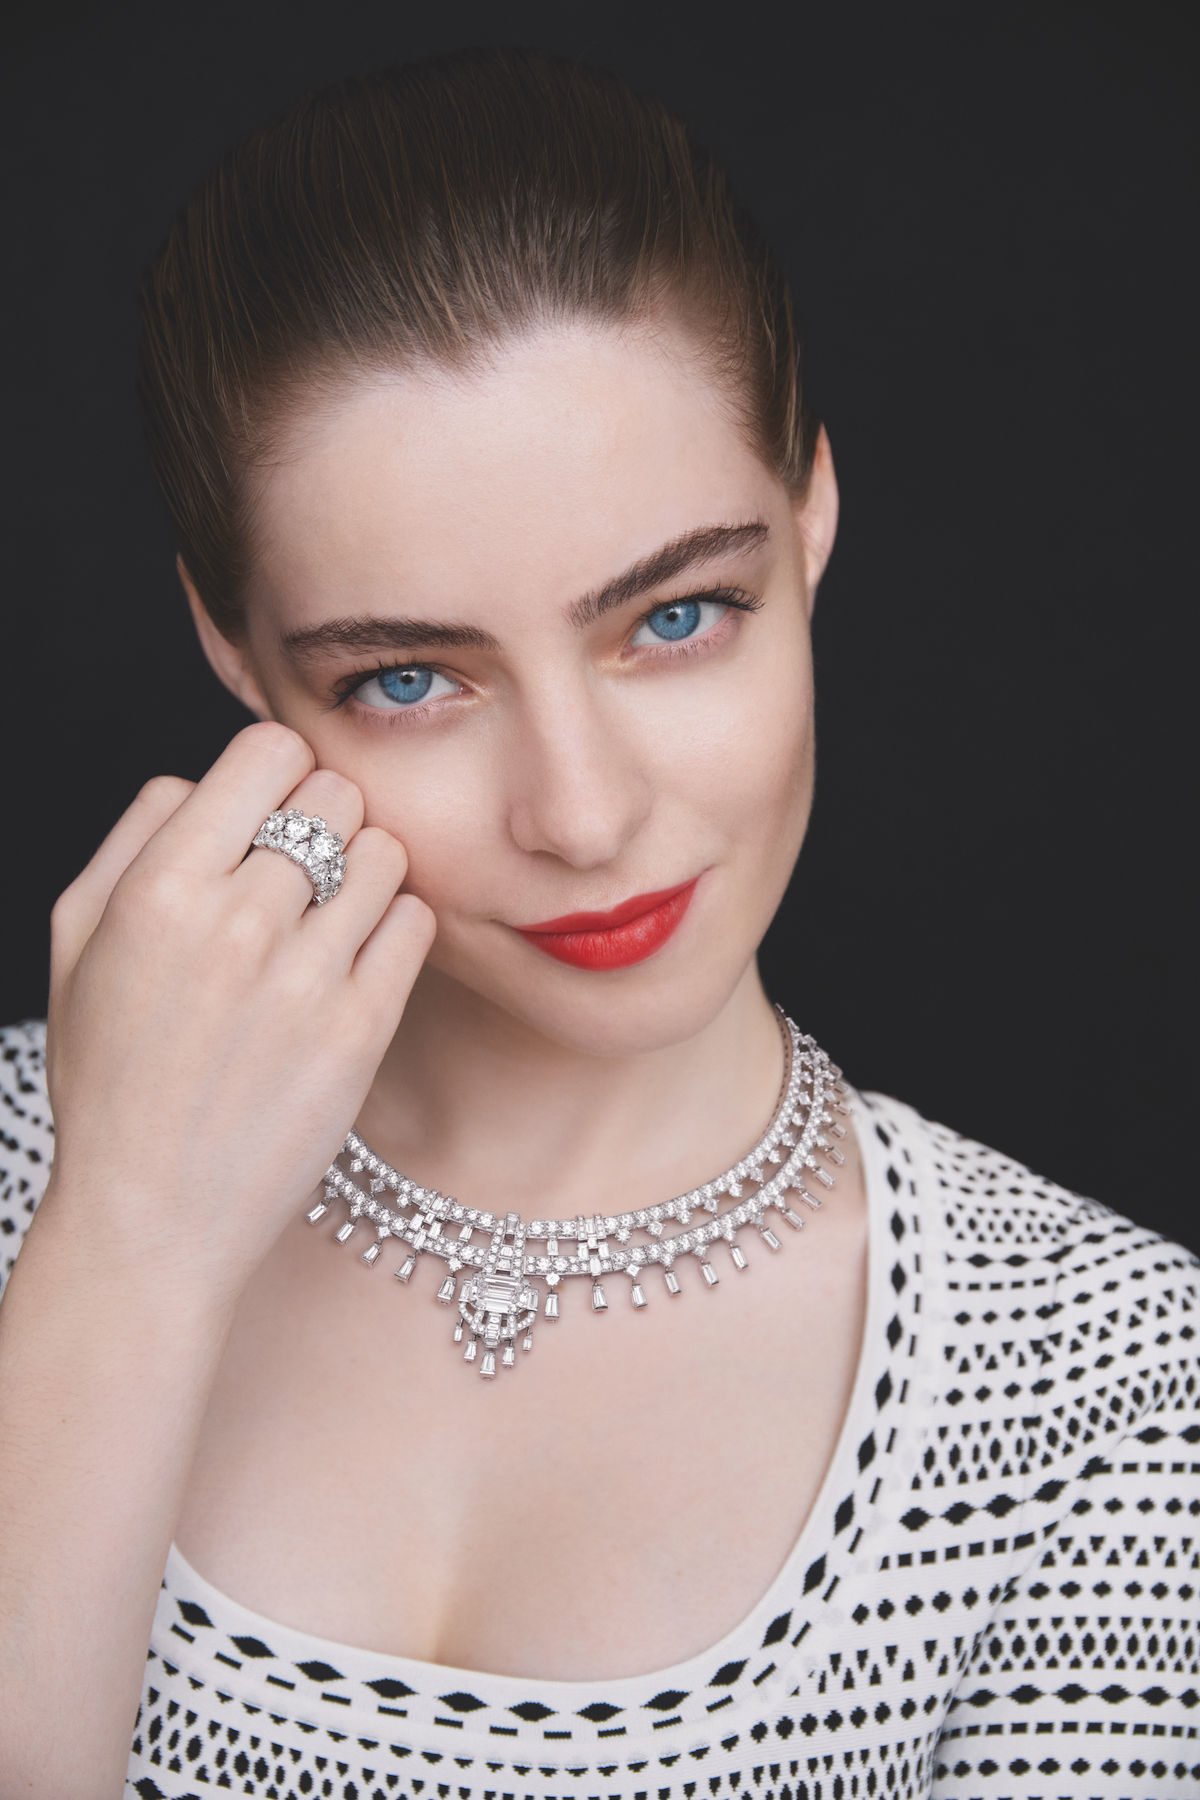 van-cleef-&-arpels’-new-high-jewellery-collection,-legend-of-diamonds-–-white-diamond-variations,-features-82-all-diamond-creations